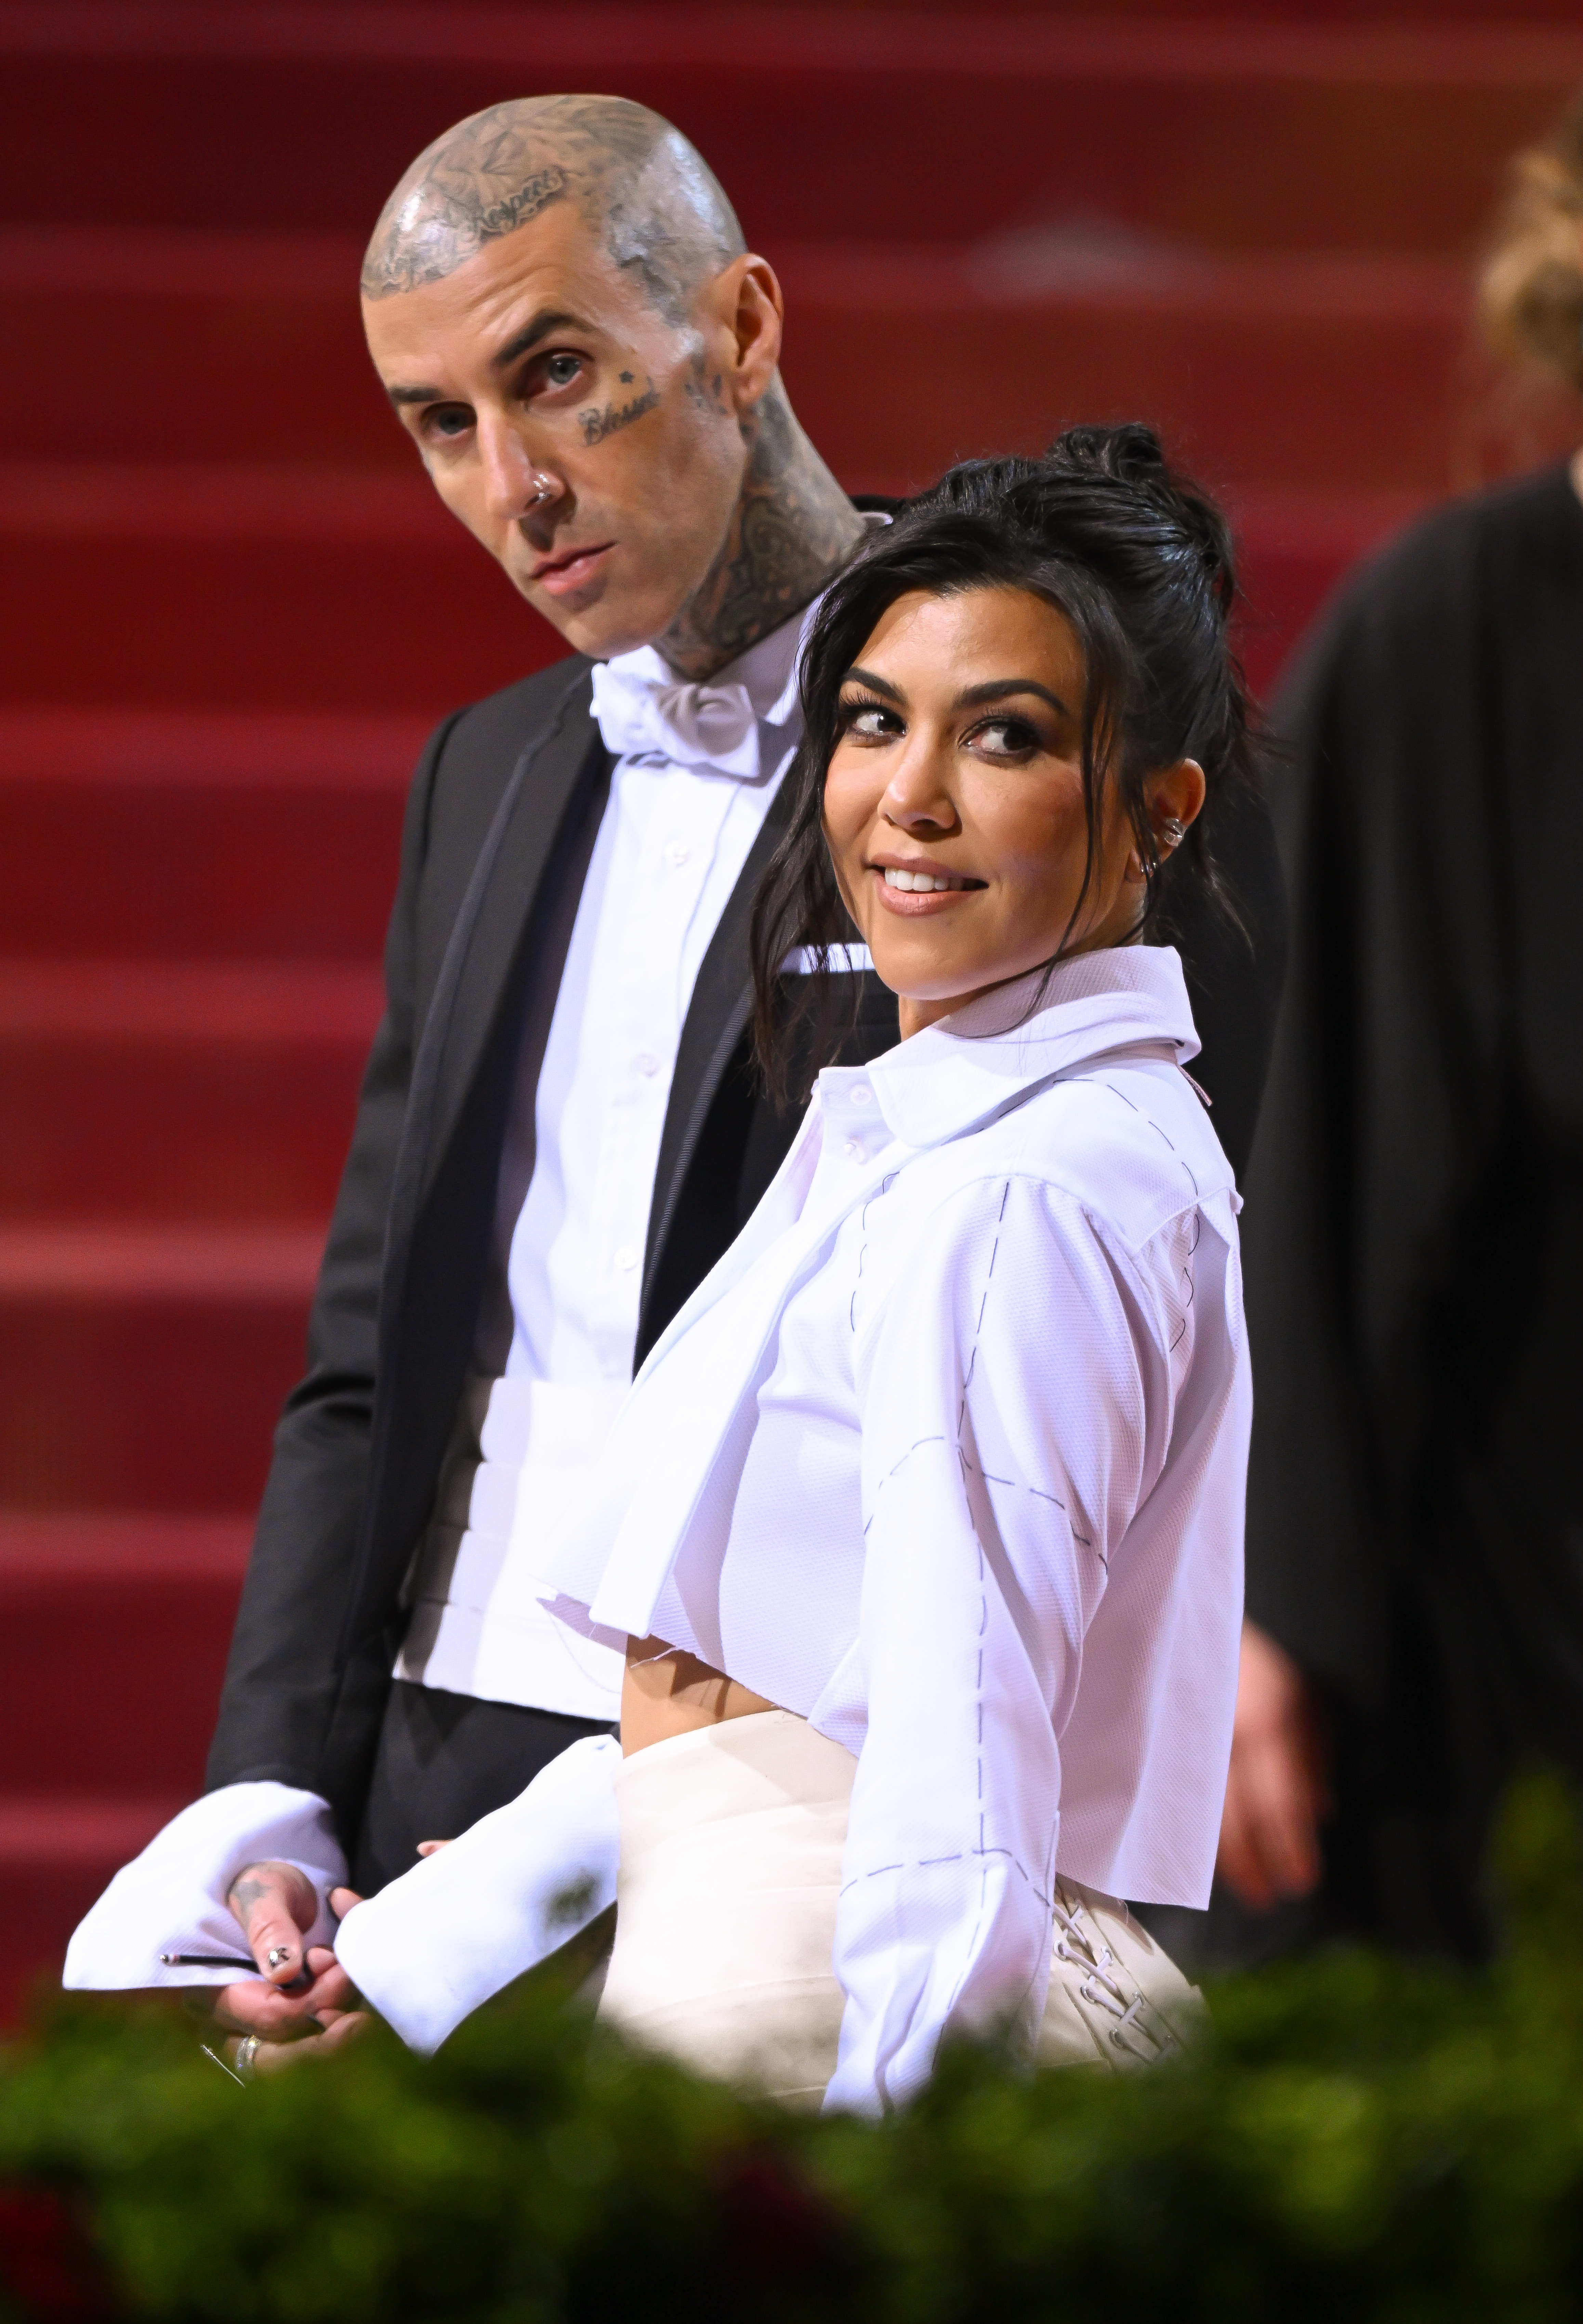 Fans raved over Travis and Kourtney in the reality star's Instagram comment section